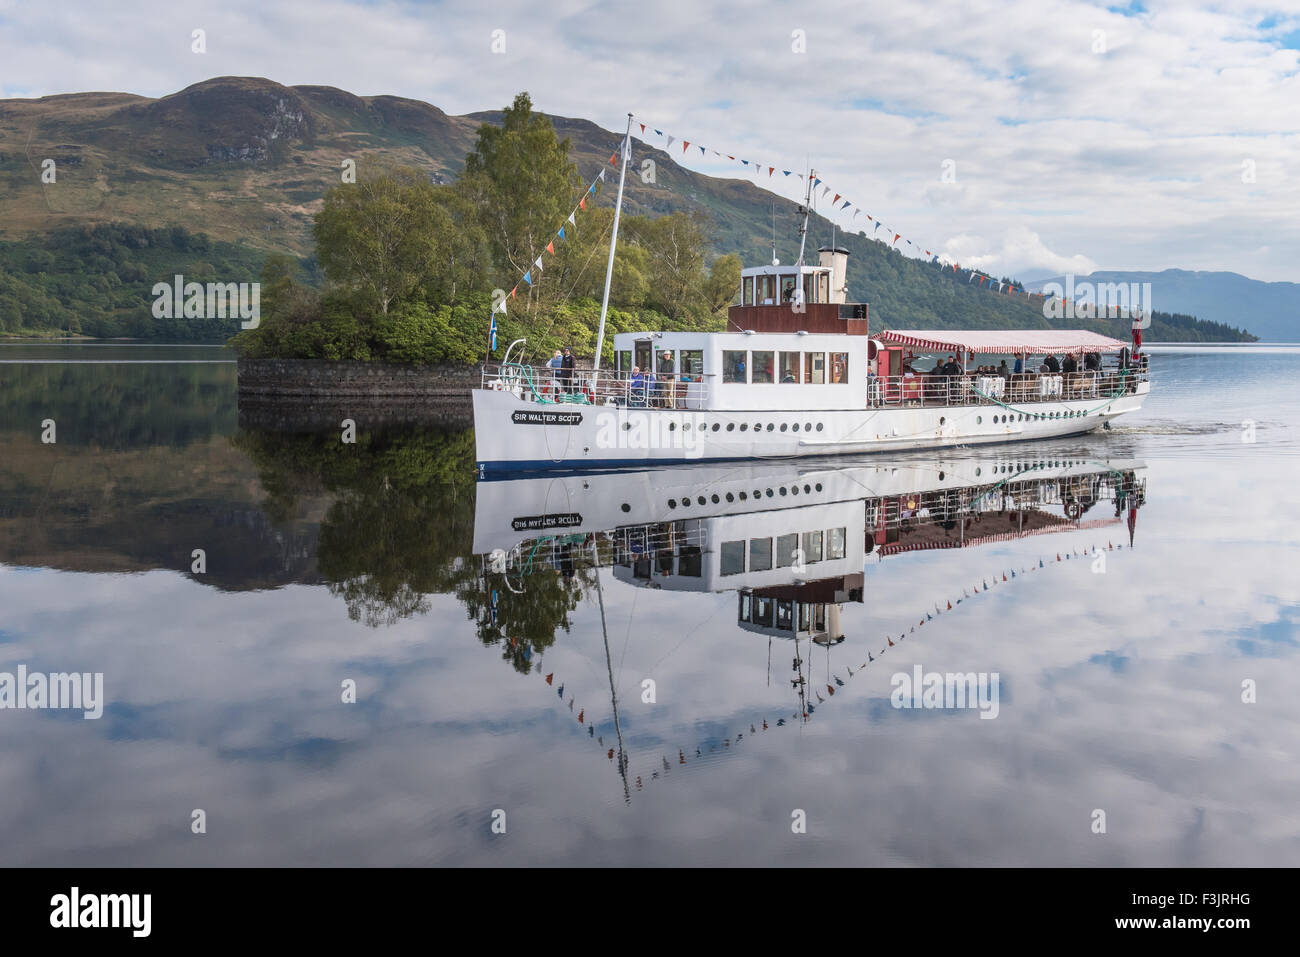 The steamship Sir Walter Scott arriving at the pier at Stronachlachar on Loch Katrine, with perfect reflections in the water. Stock Photo